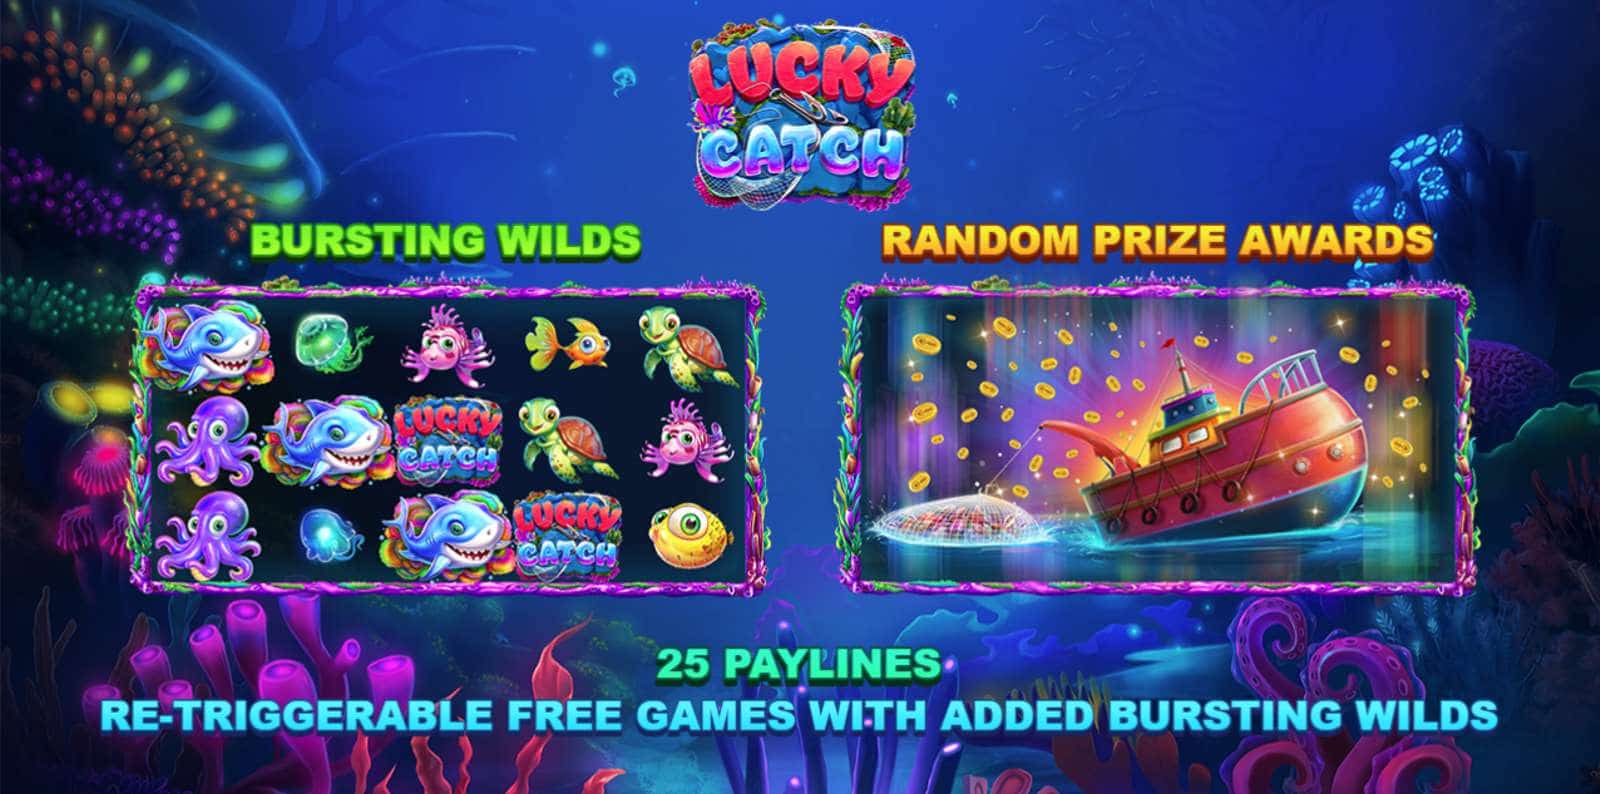 Reel in Fortunate Wins: Explore the World of Lucky Catch! 3